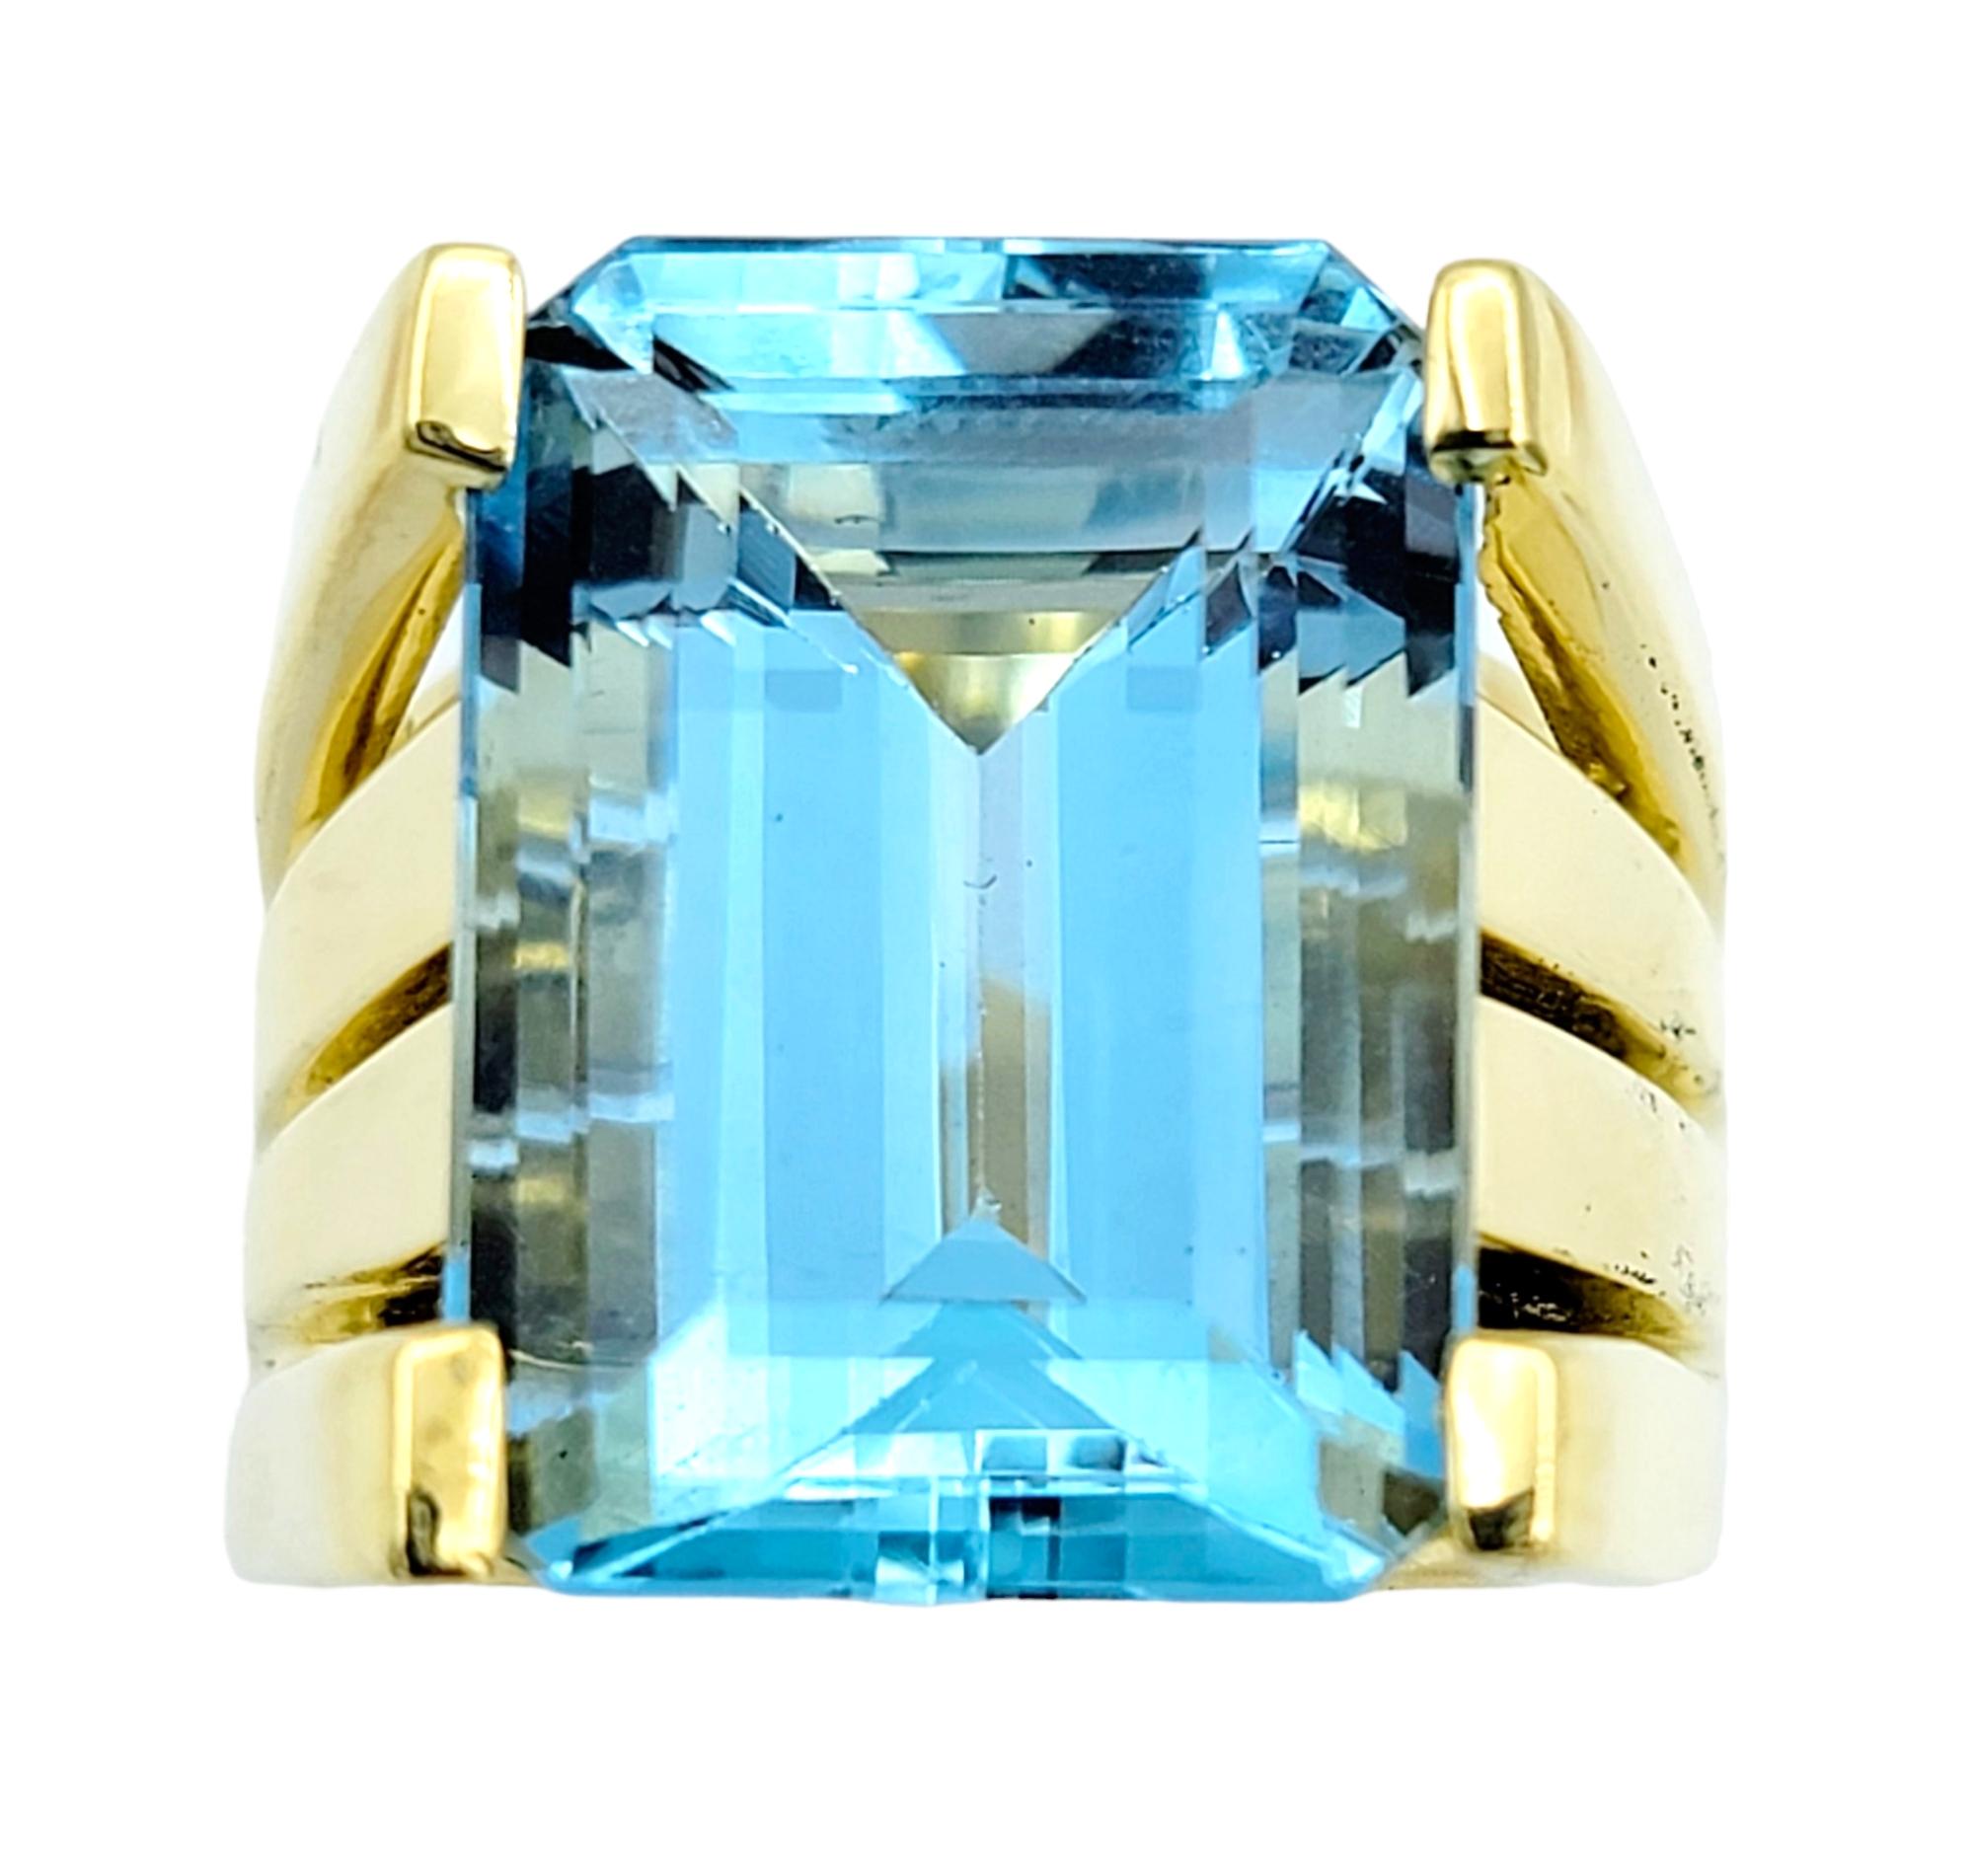 Ring size: 5.5

This extraordinary cocktail ring showcases a mesmerizing 13.05 carat emerald-cut aquamarine, cradled within an exquisite setting of opulent 18 karat yellow gold. The aquamarine's clarity and depth of color are nothing short of